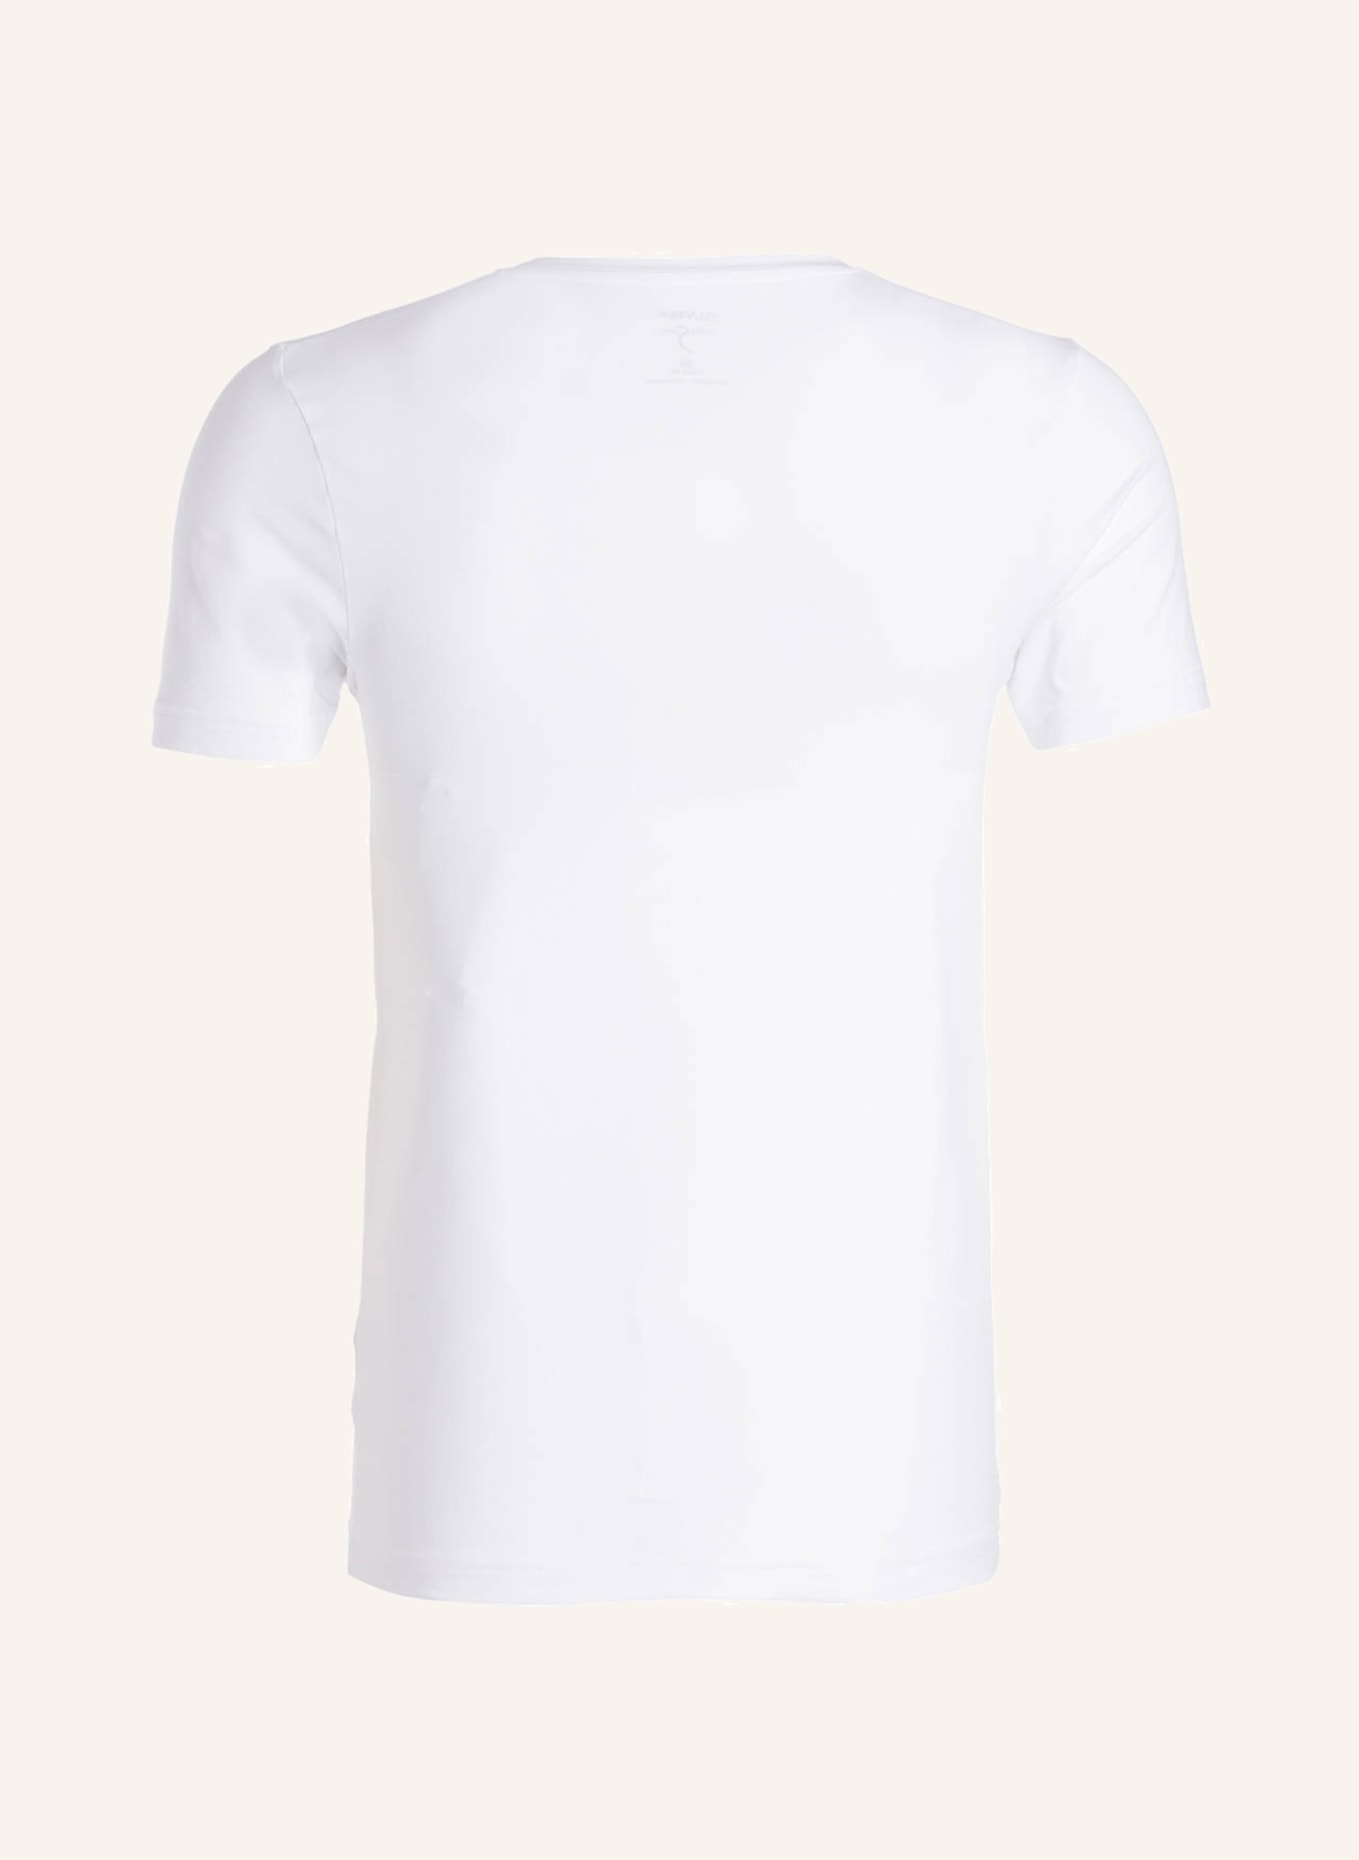 OLYMP T-Shirt body Five fit in weiss Level